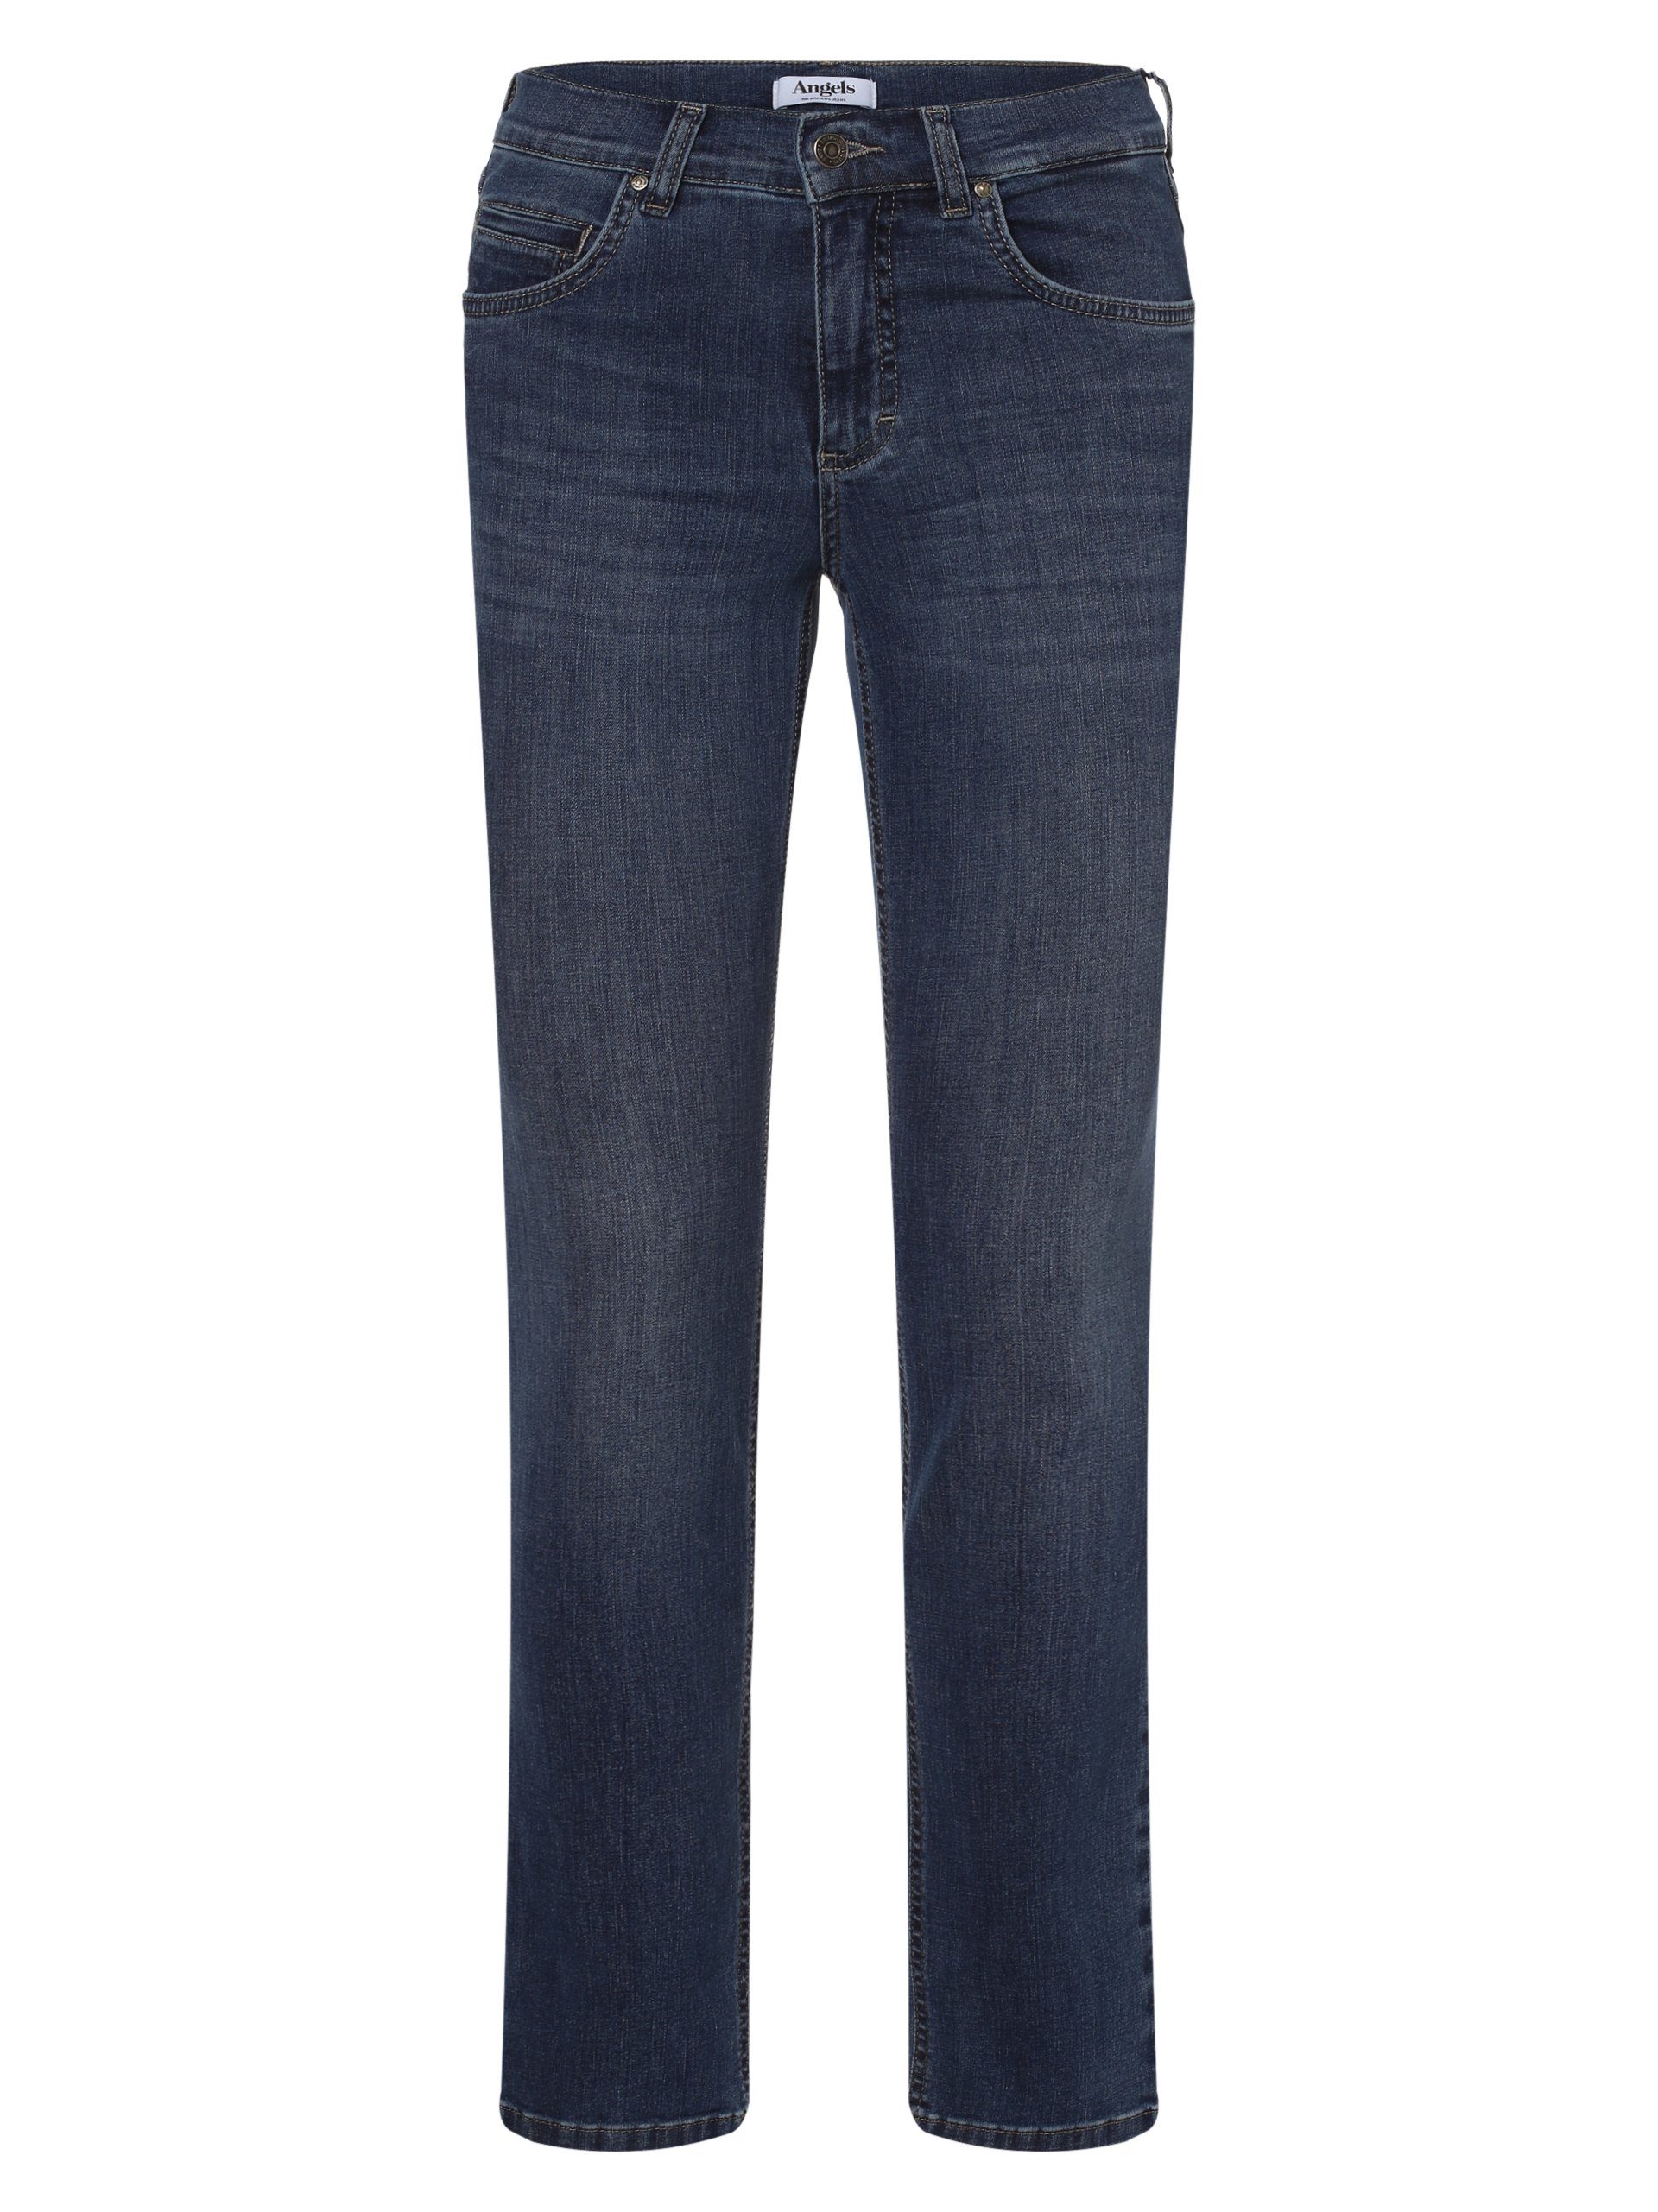 ANGELS Slim-fit-Jeans Cici blue stone